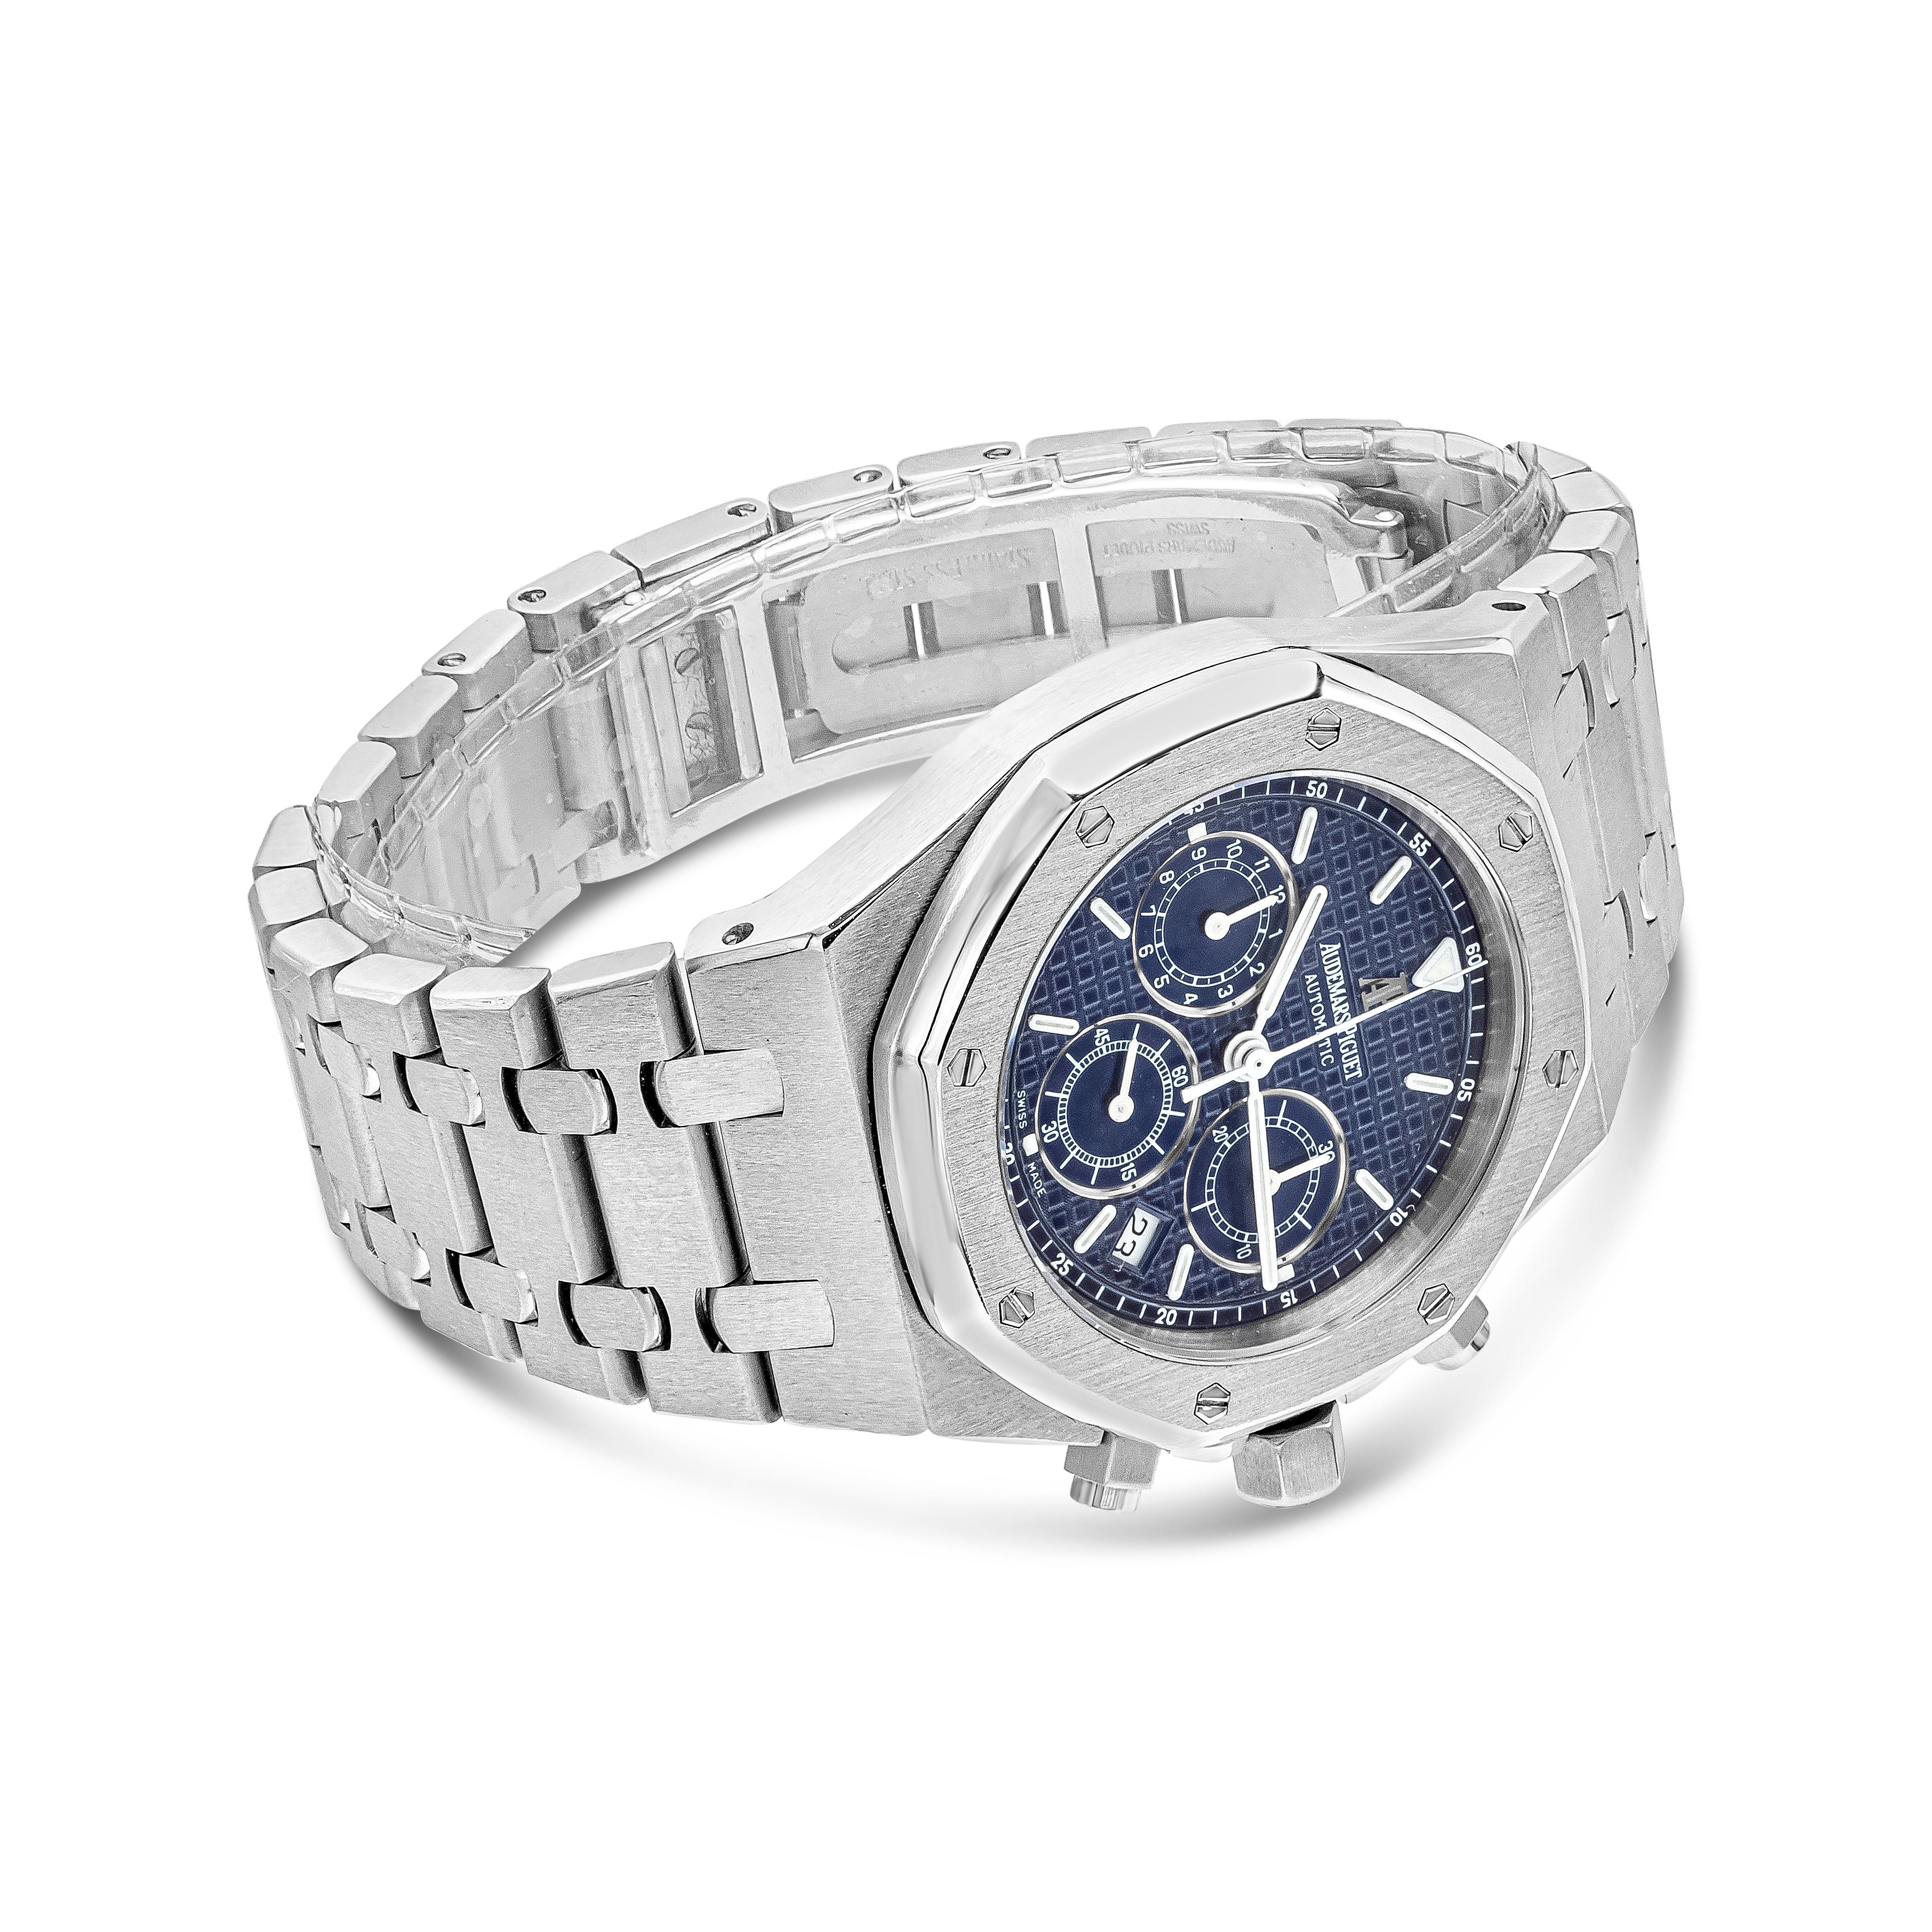 Audemars Piguet Royal Oak Chronograph Model Ref. 25860ST.OO.1110ST.01
Case: 39mm Stainless Steel Case with fixed stainless steel bezel and sapphire crystal. 
Crown: Screw-down crown with round pushers.
Dial: Blue Dial with three sub dials and a date